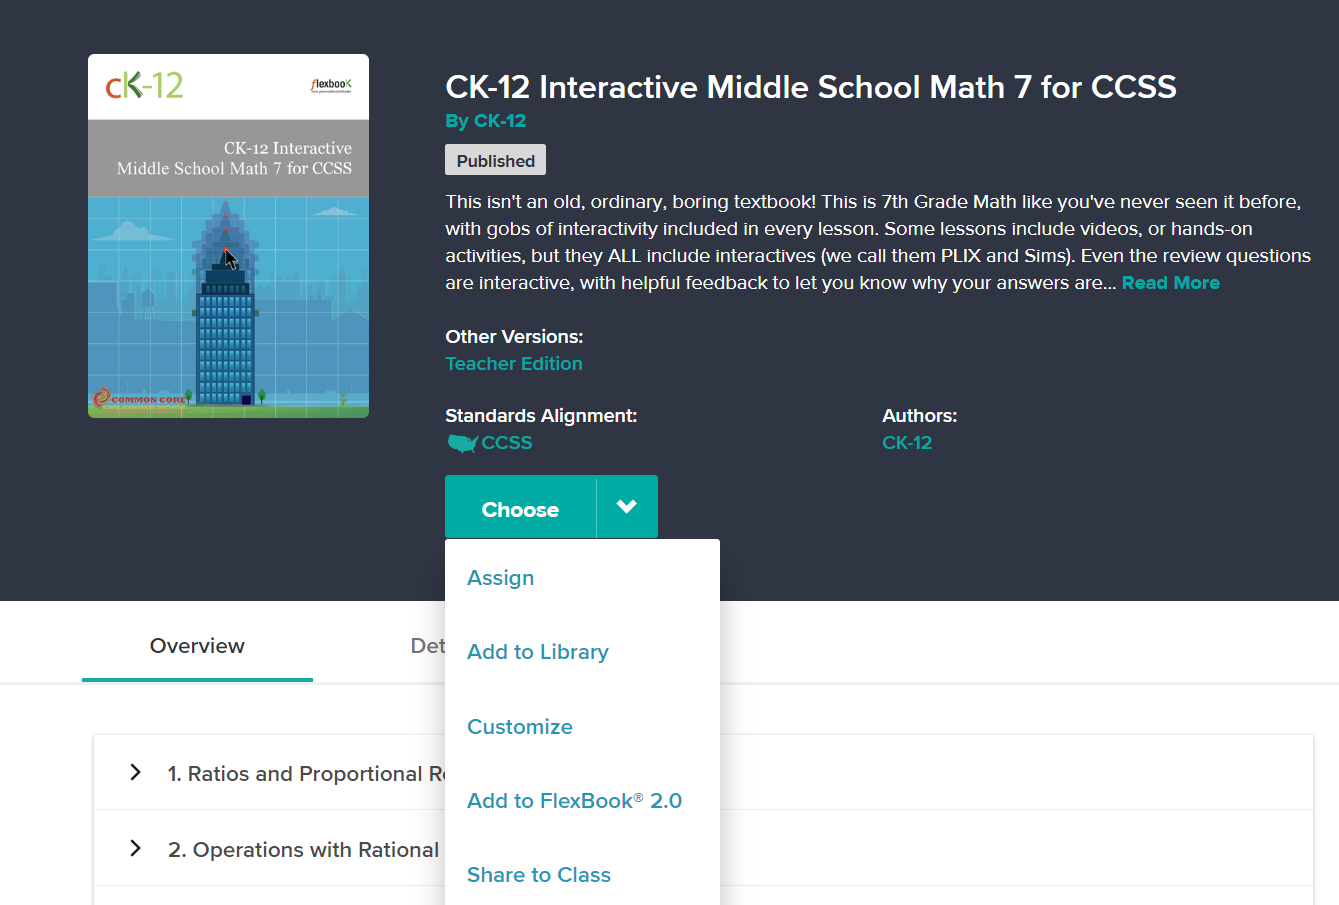 Screenshot of CK-12 Interactive Middle School Math 7 for CCSS. This includes the title, a description and a dropdown menu allowing you to Assign, Add to Library, Customize, Add to Flexbook 2.0, and Share to Class.